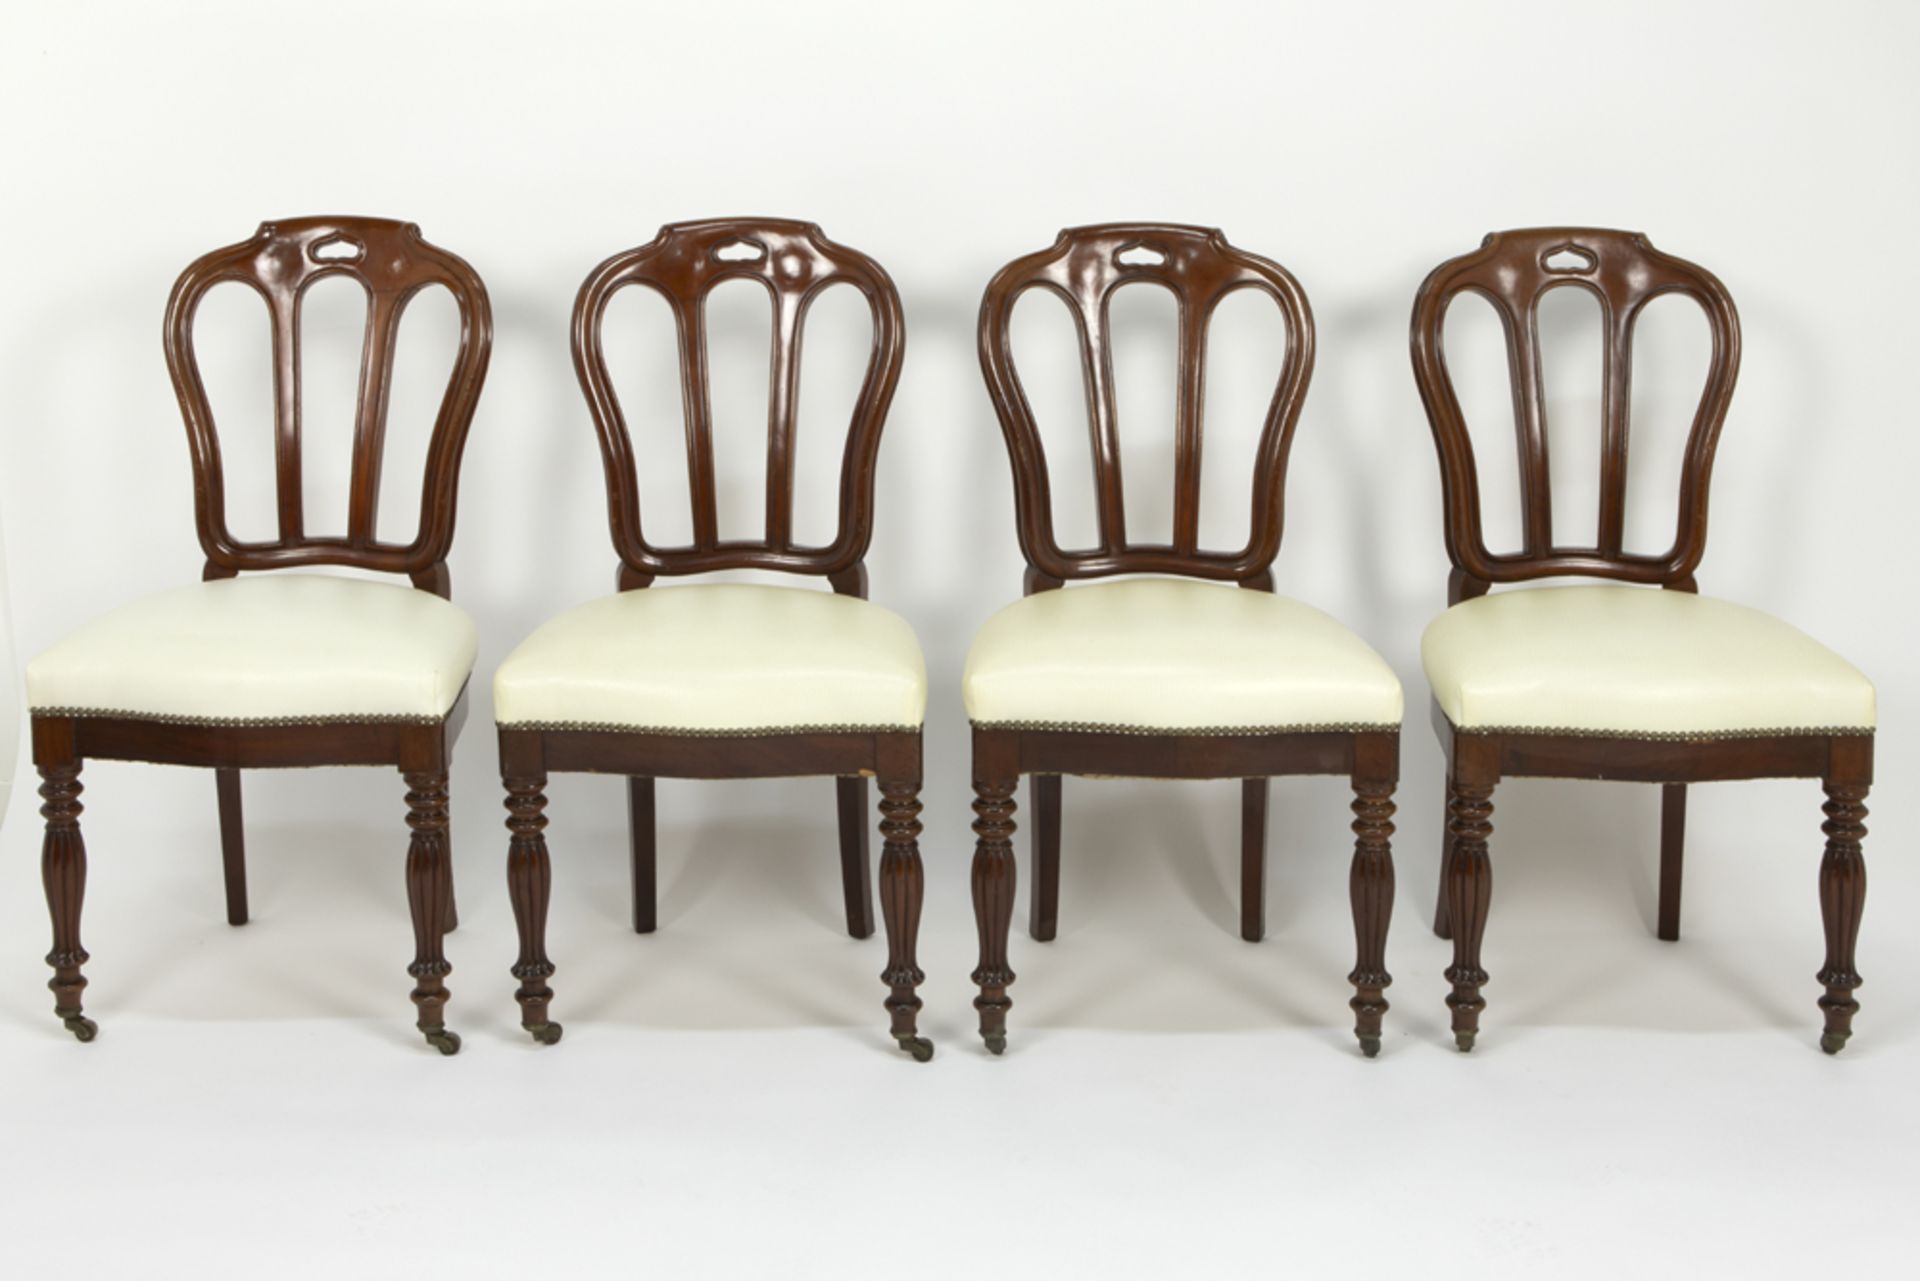 rare series of sixteen 19th Cent. chairs with an elegant design in mahogany - all completely - Image 4 of 6